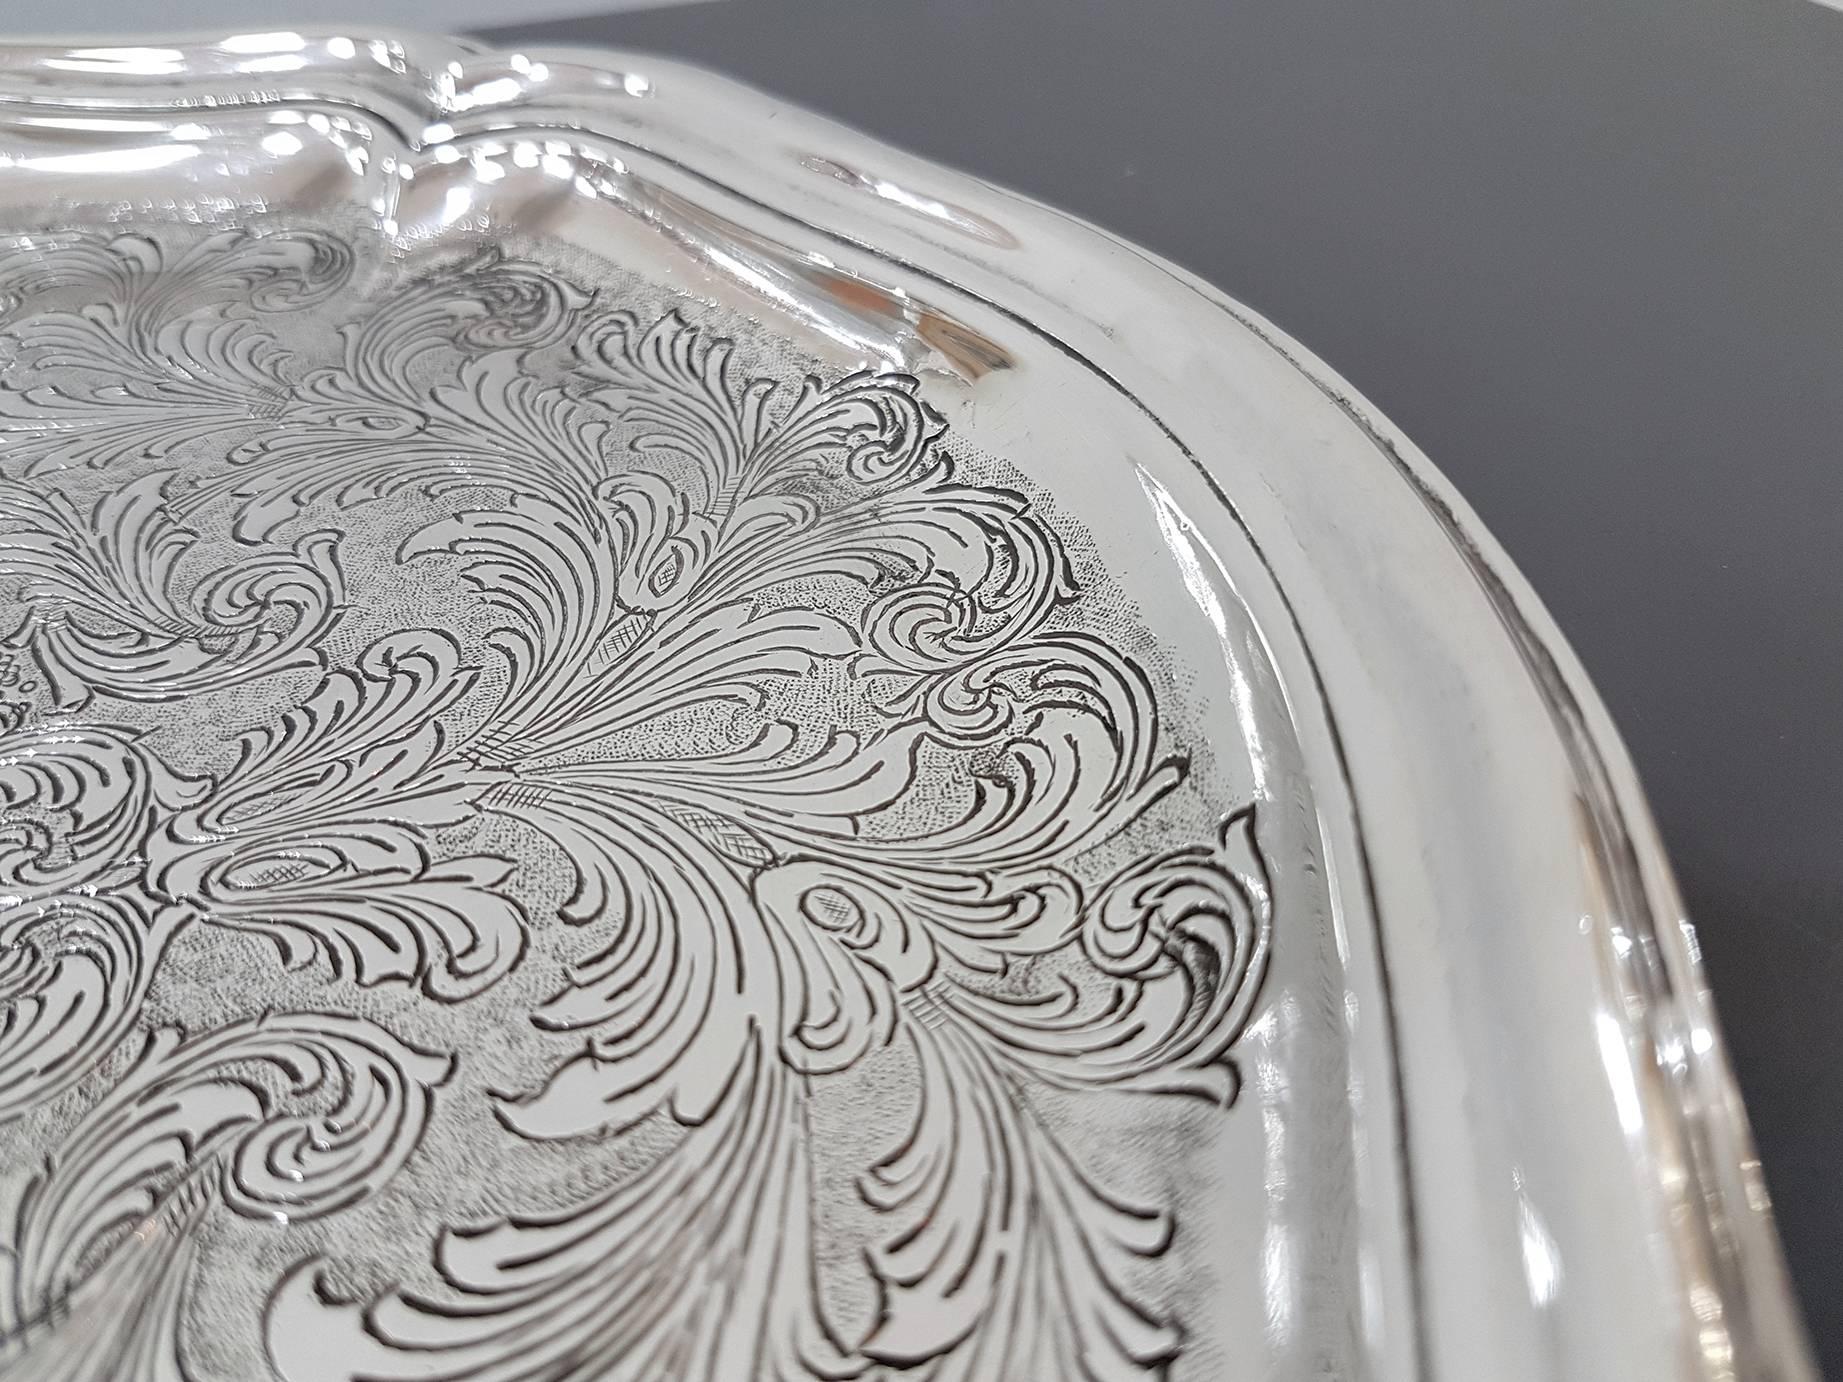 19th Century Italian Silver Oval Baroque Tray, Completely Engraved by Hand For Sale 1